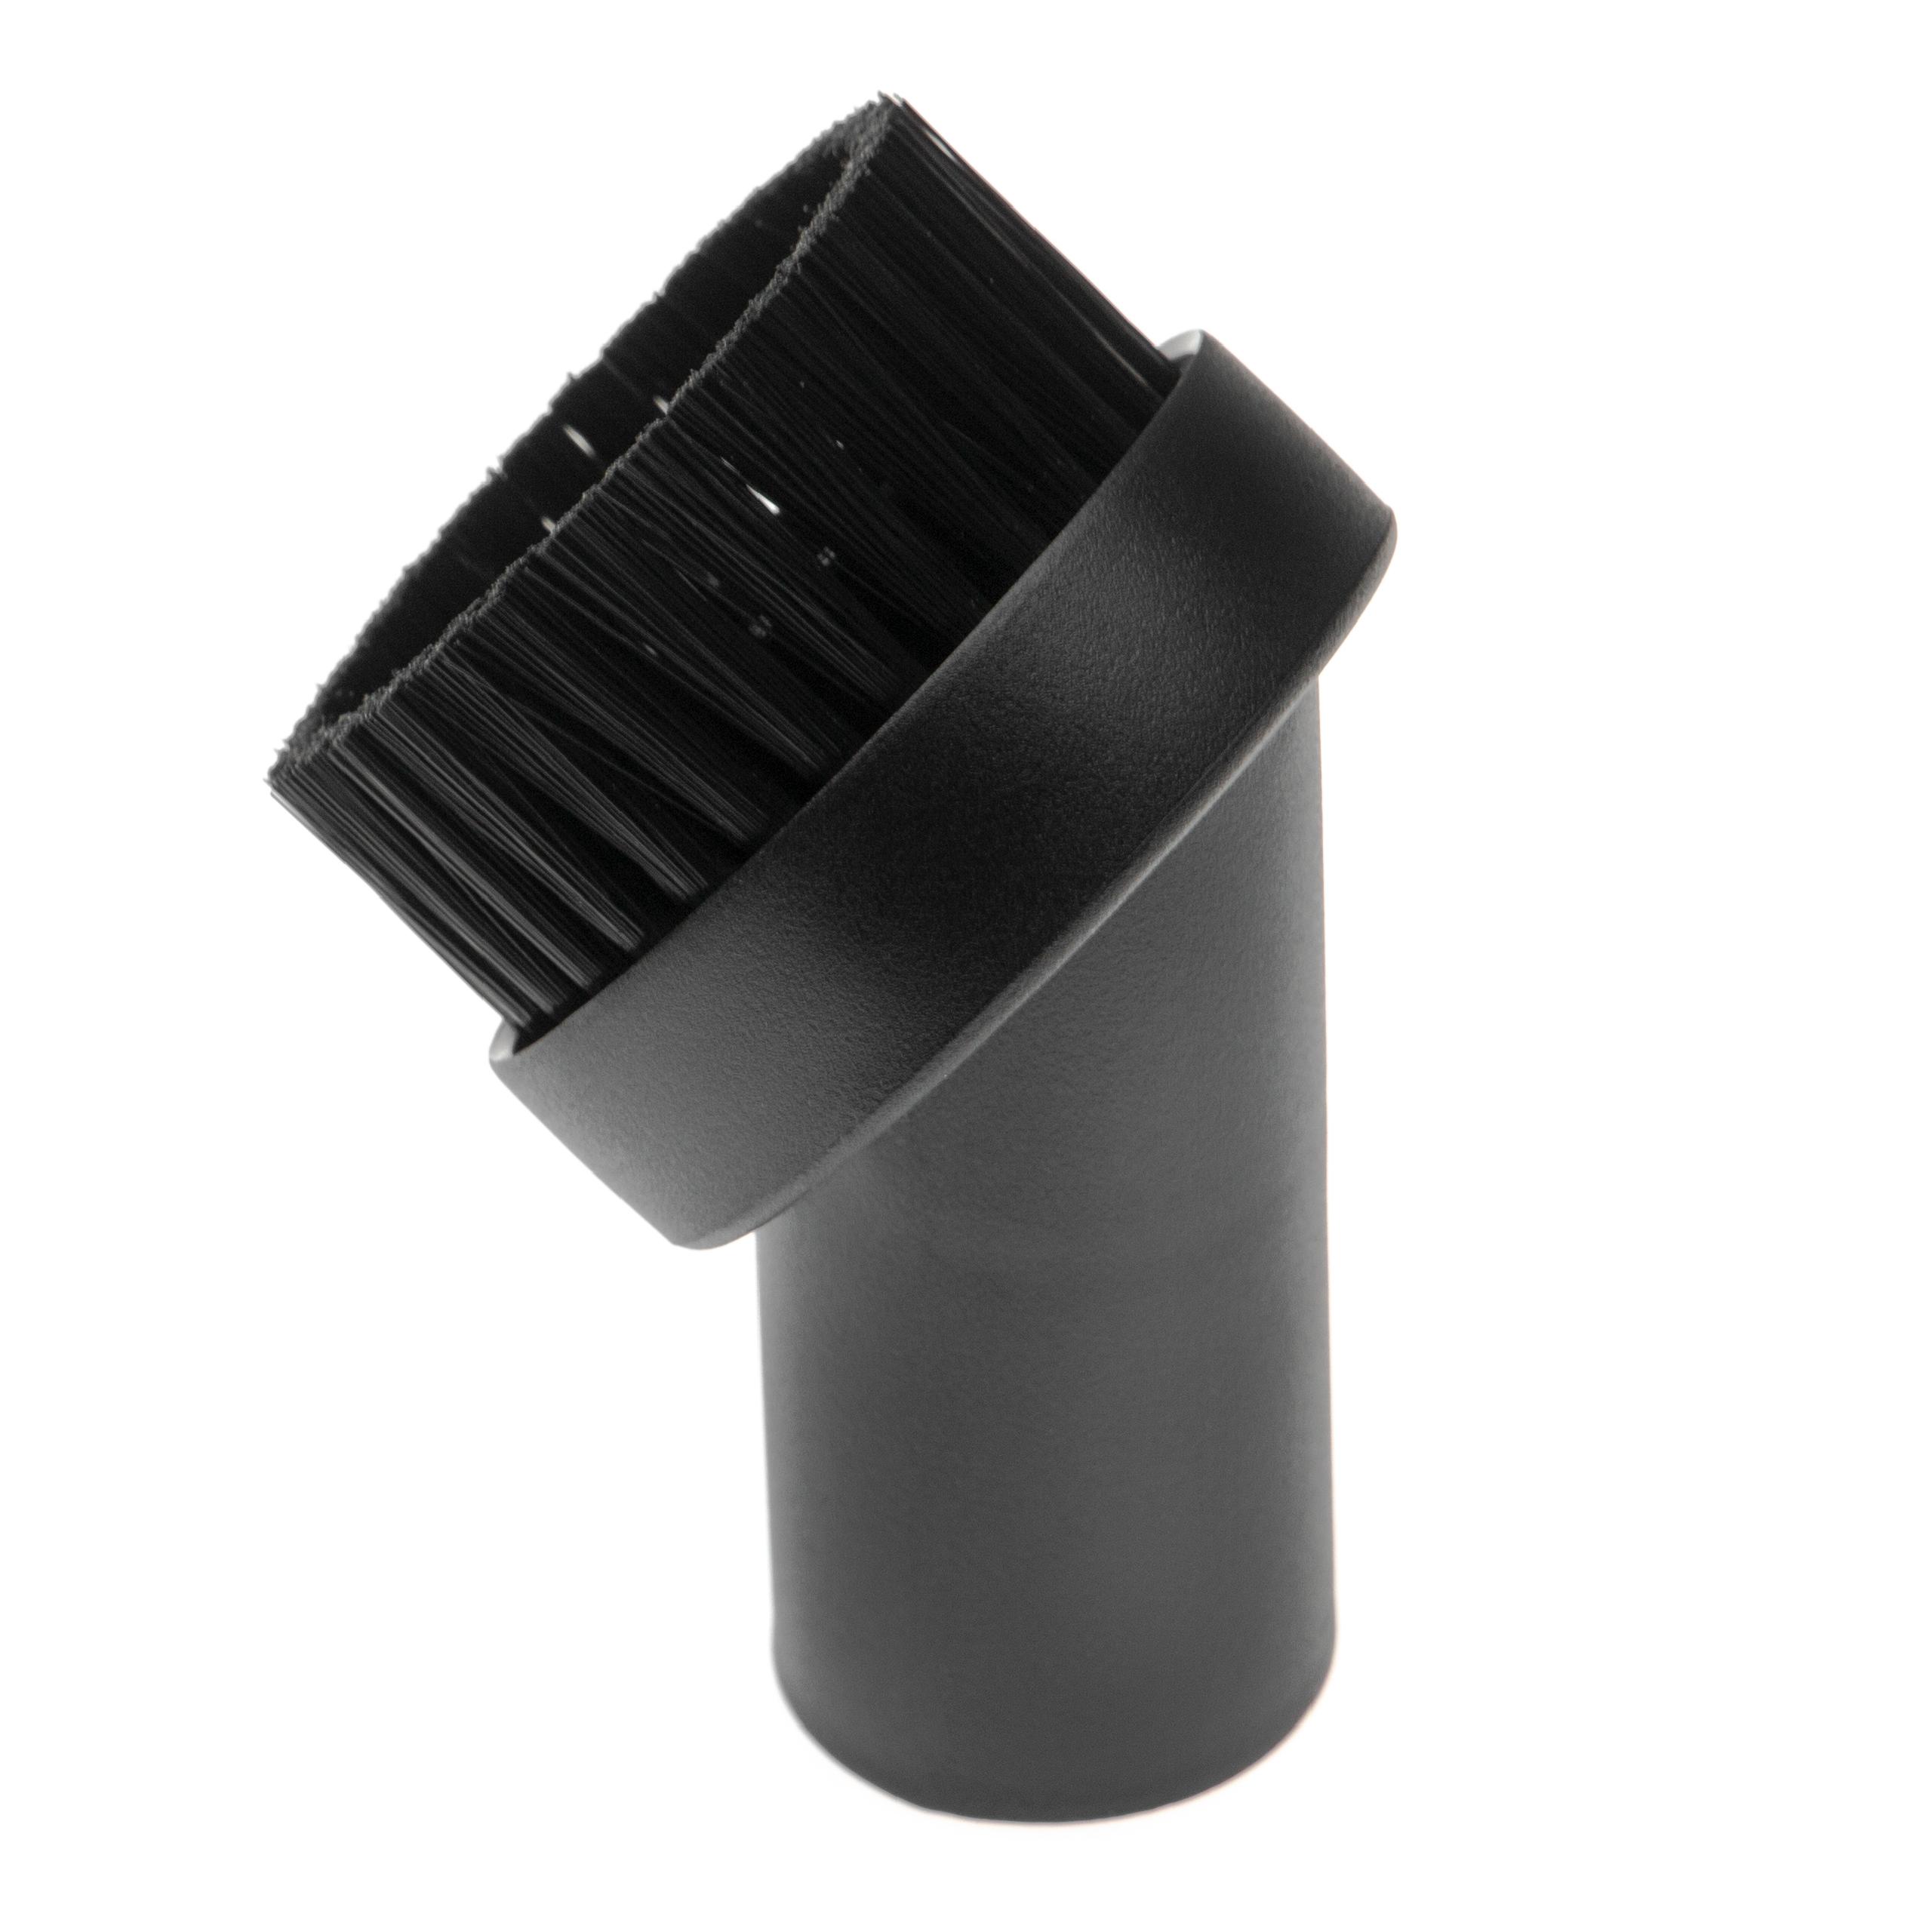  Brush Nozzle 32 mm Connector for Vacuum Cleaner - Furniture Brush with Bristles